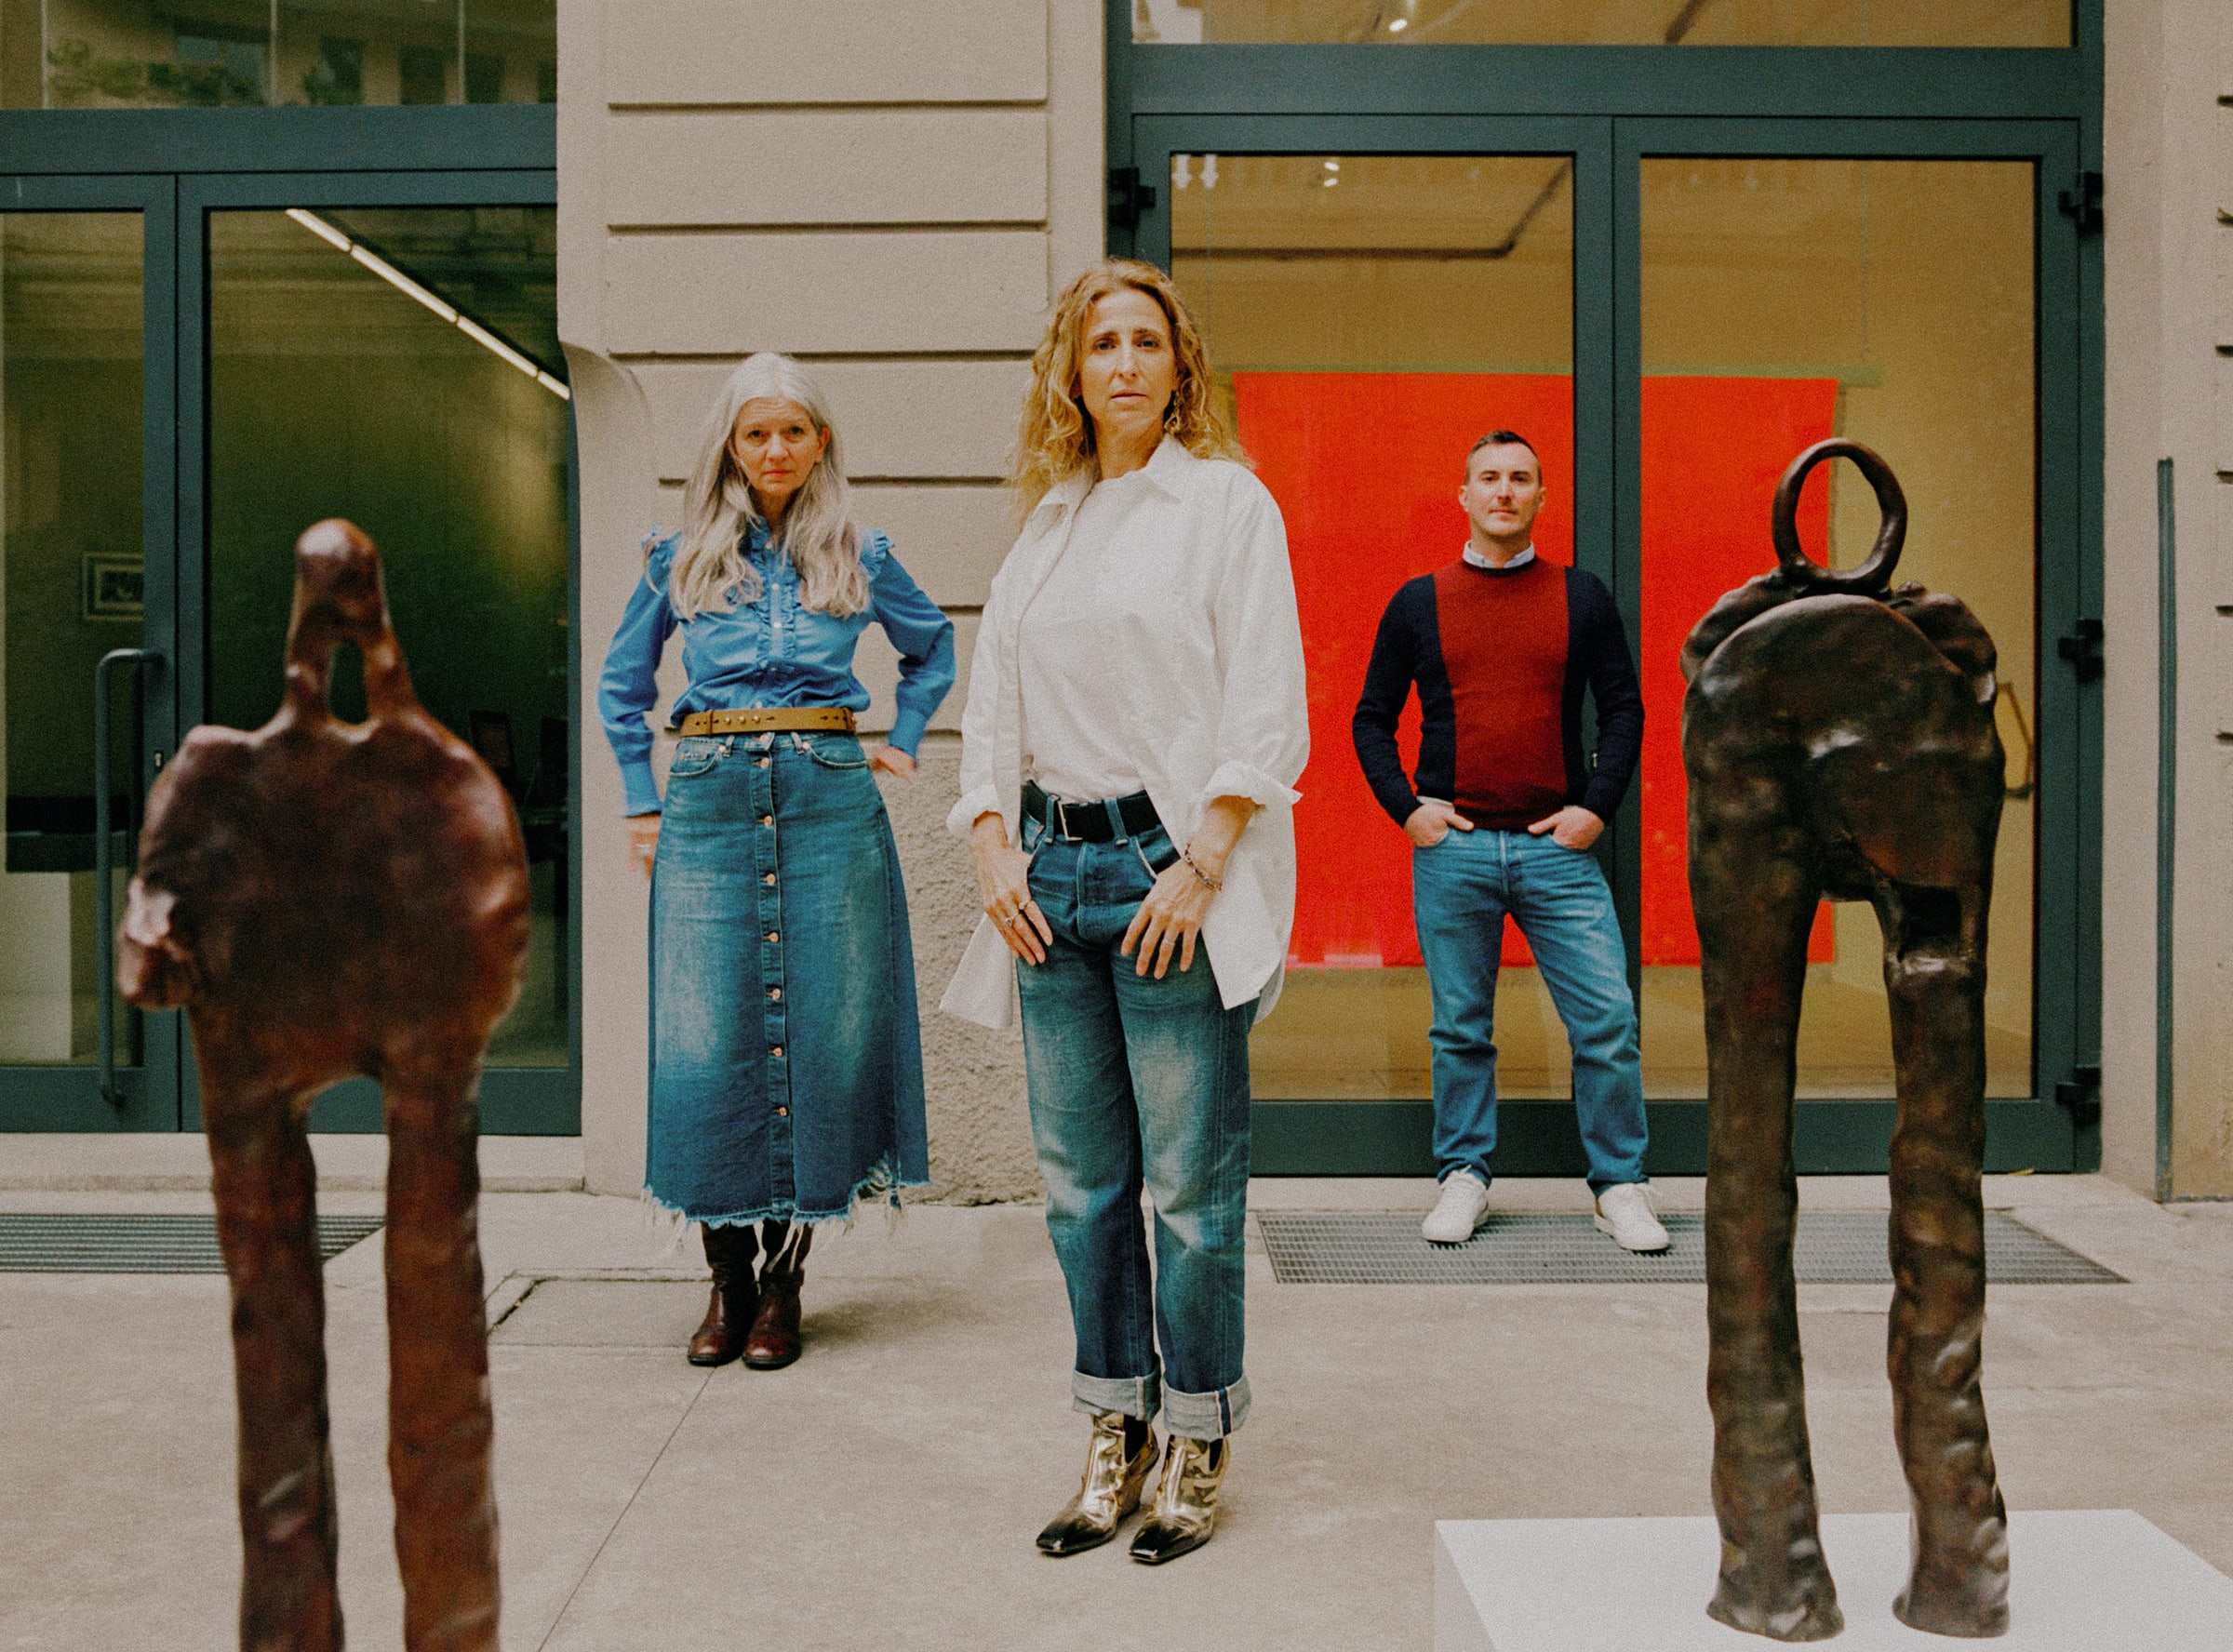 Gallerist Francesca Kaufmann of Kaufmann Repetto with her senior directors, flanked by sculptures by Simone Fattal. Photography by Julius Hirtzberger for Art Basel.